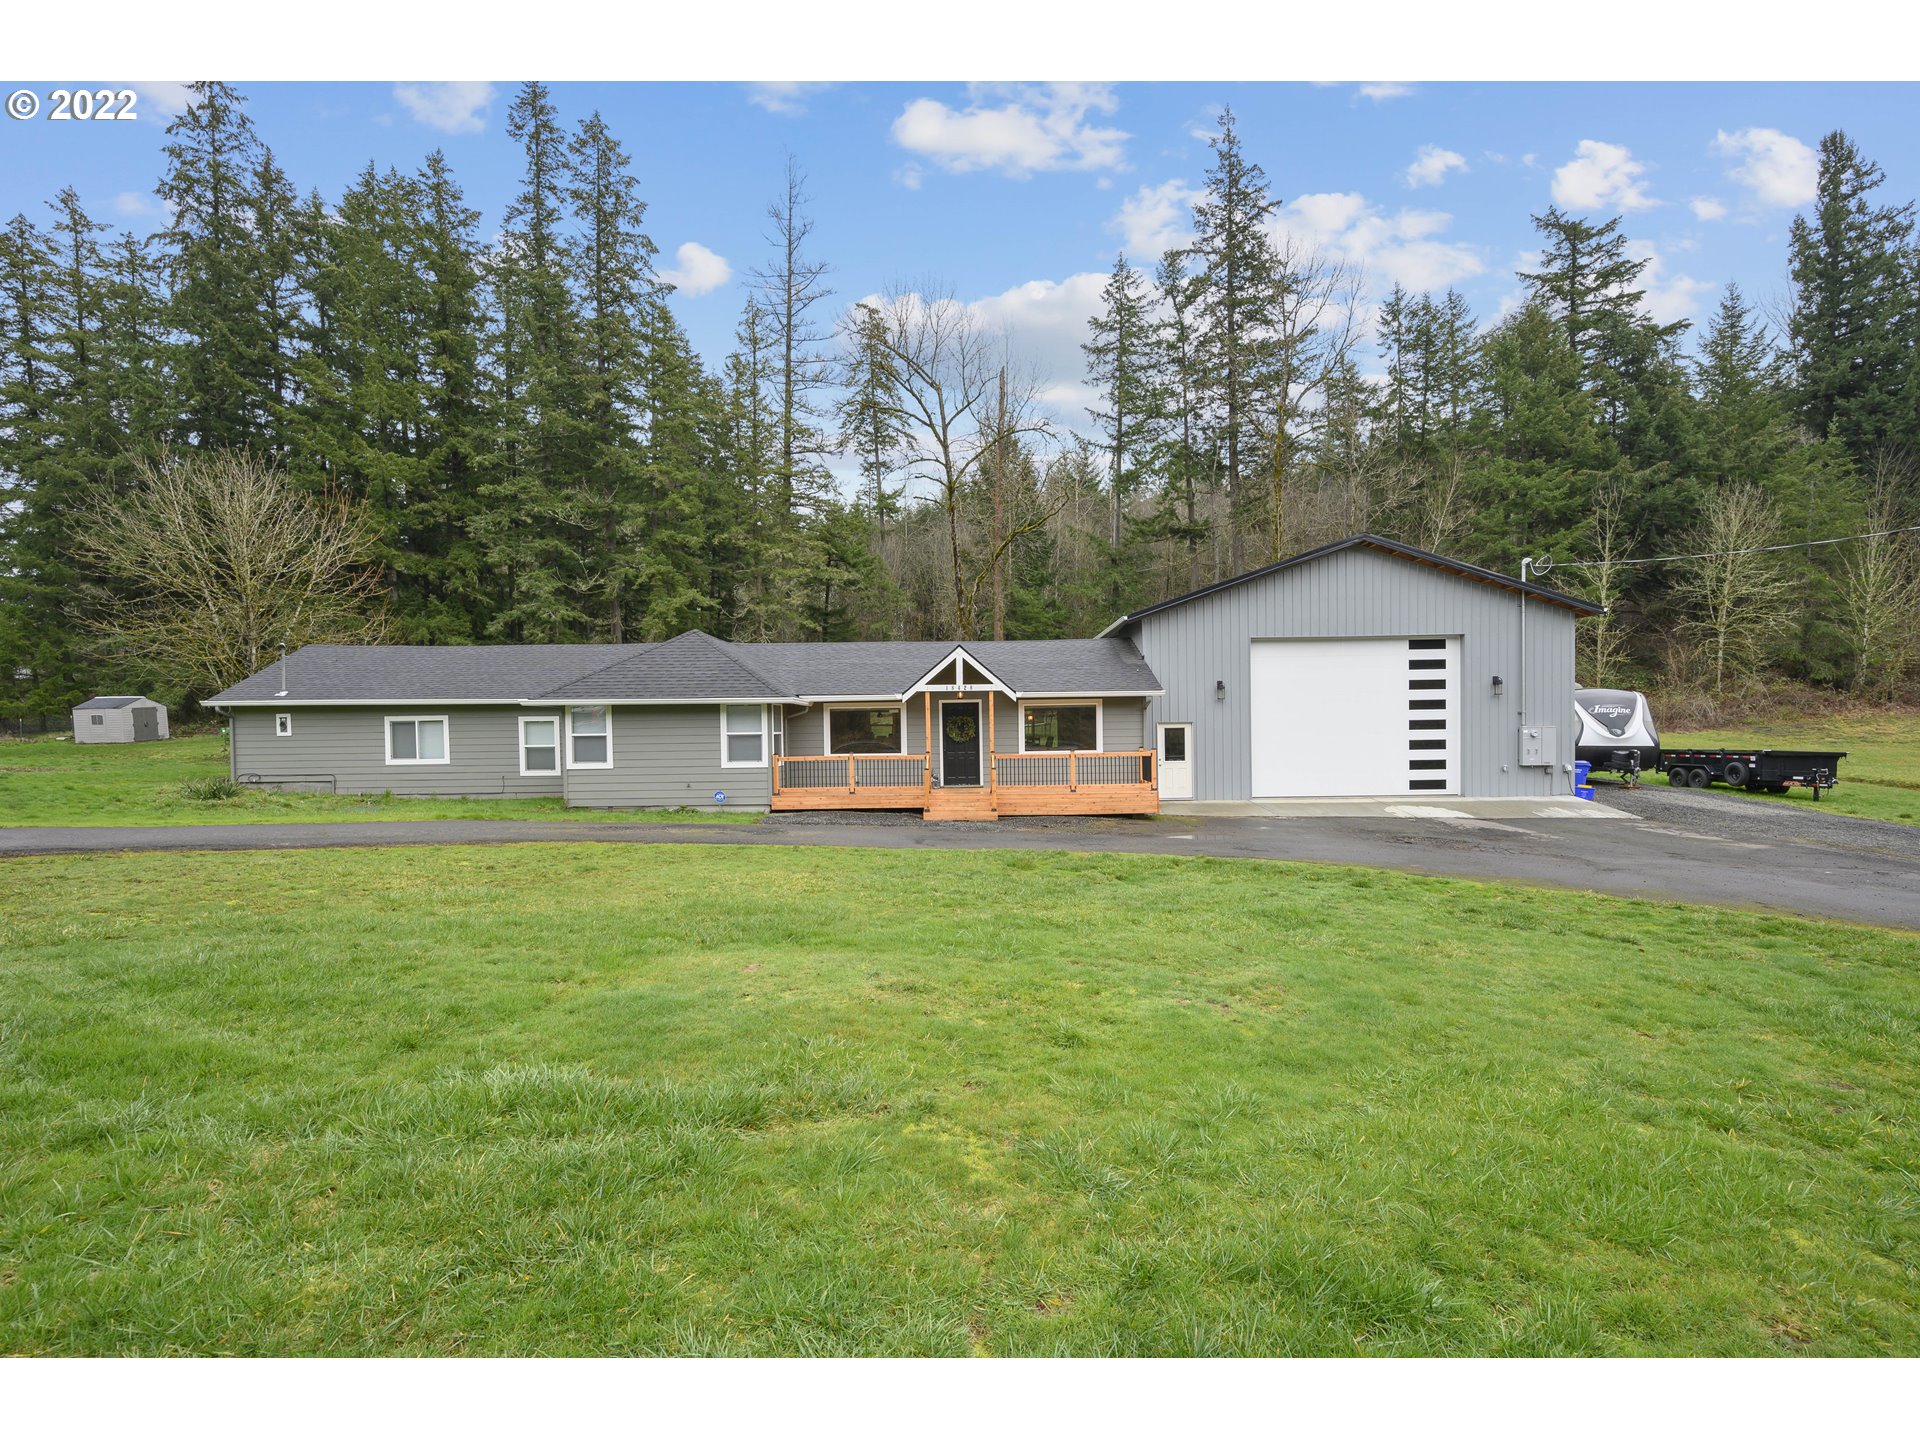 Move in ready, updated 2015 square foot one-level home with newer attached approximately 1700 sq. ft shop. Home/Shop set up with 50 amp generator plug and 30 amp pug set up for your RV. approximately 1700 sq ft attached shop/garage. 2 acres of country living at its finest!